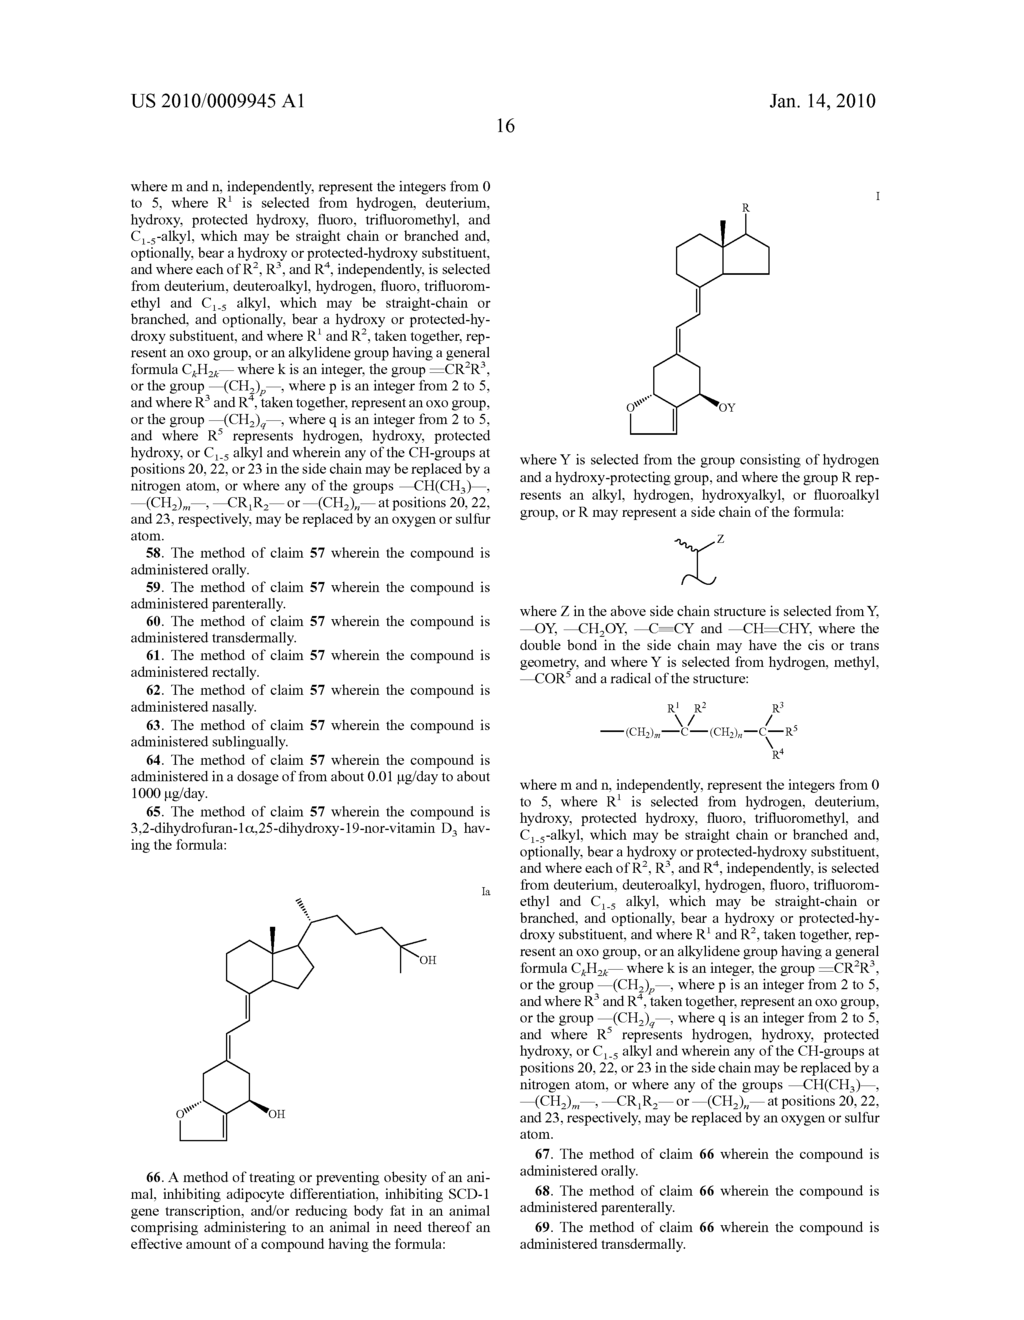 19-NOR-VITAMIN D ANALOGS WITH 3,2-DIHYDROFURAN RING - diagram, schematic, and image 22